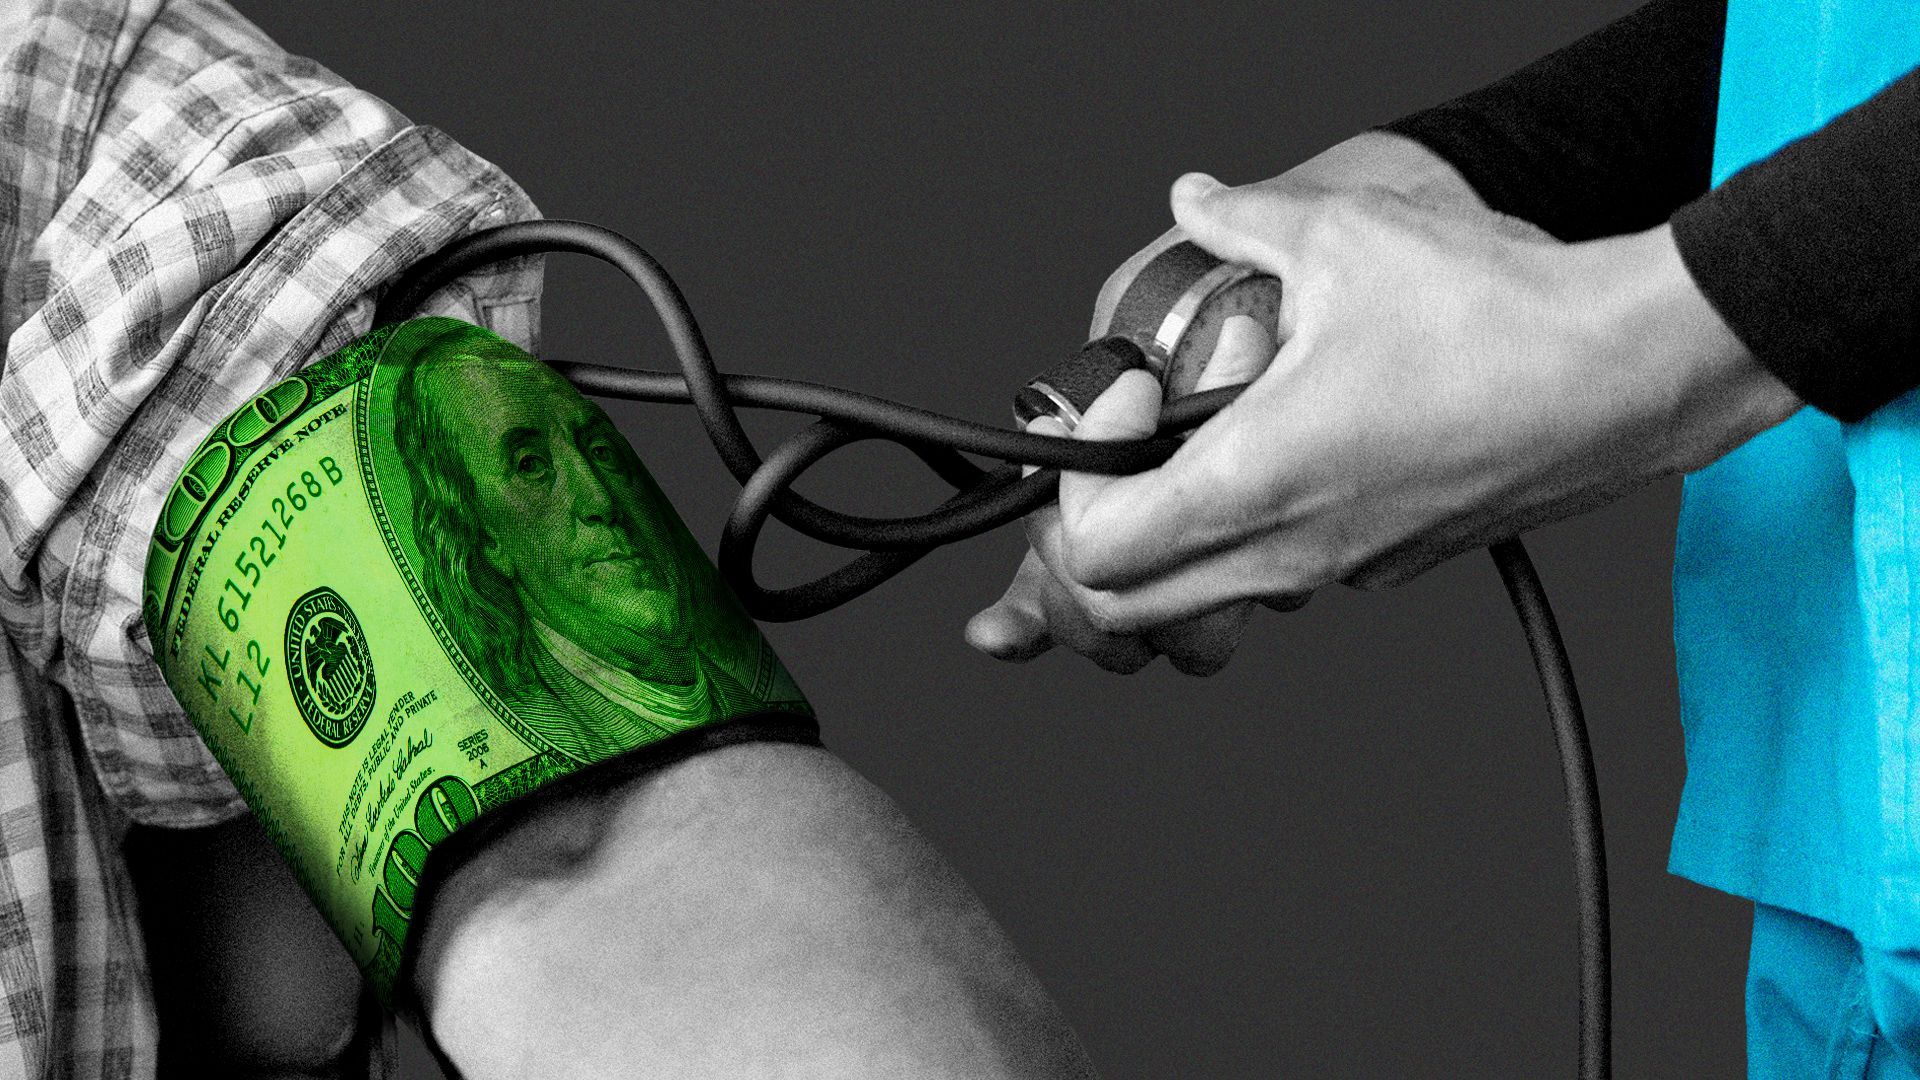 Illustration of a person wearing scrubs using a blood pressure cuff made of money.